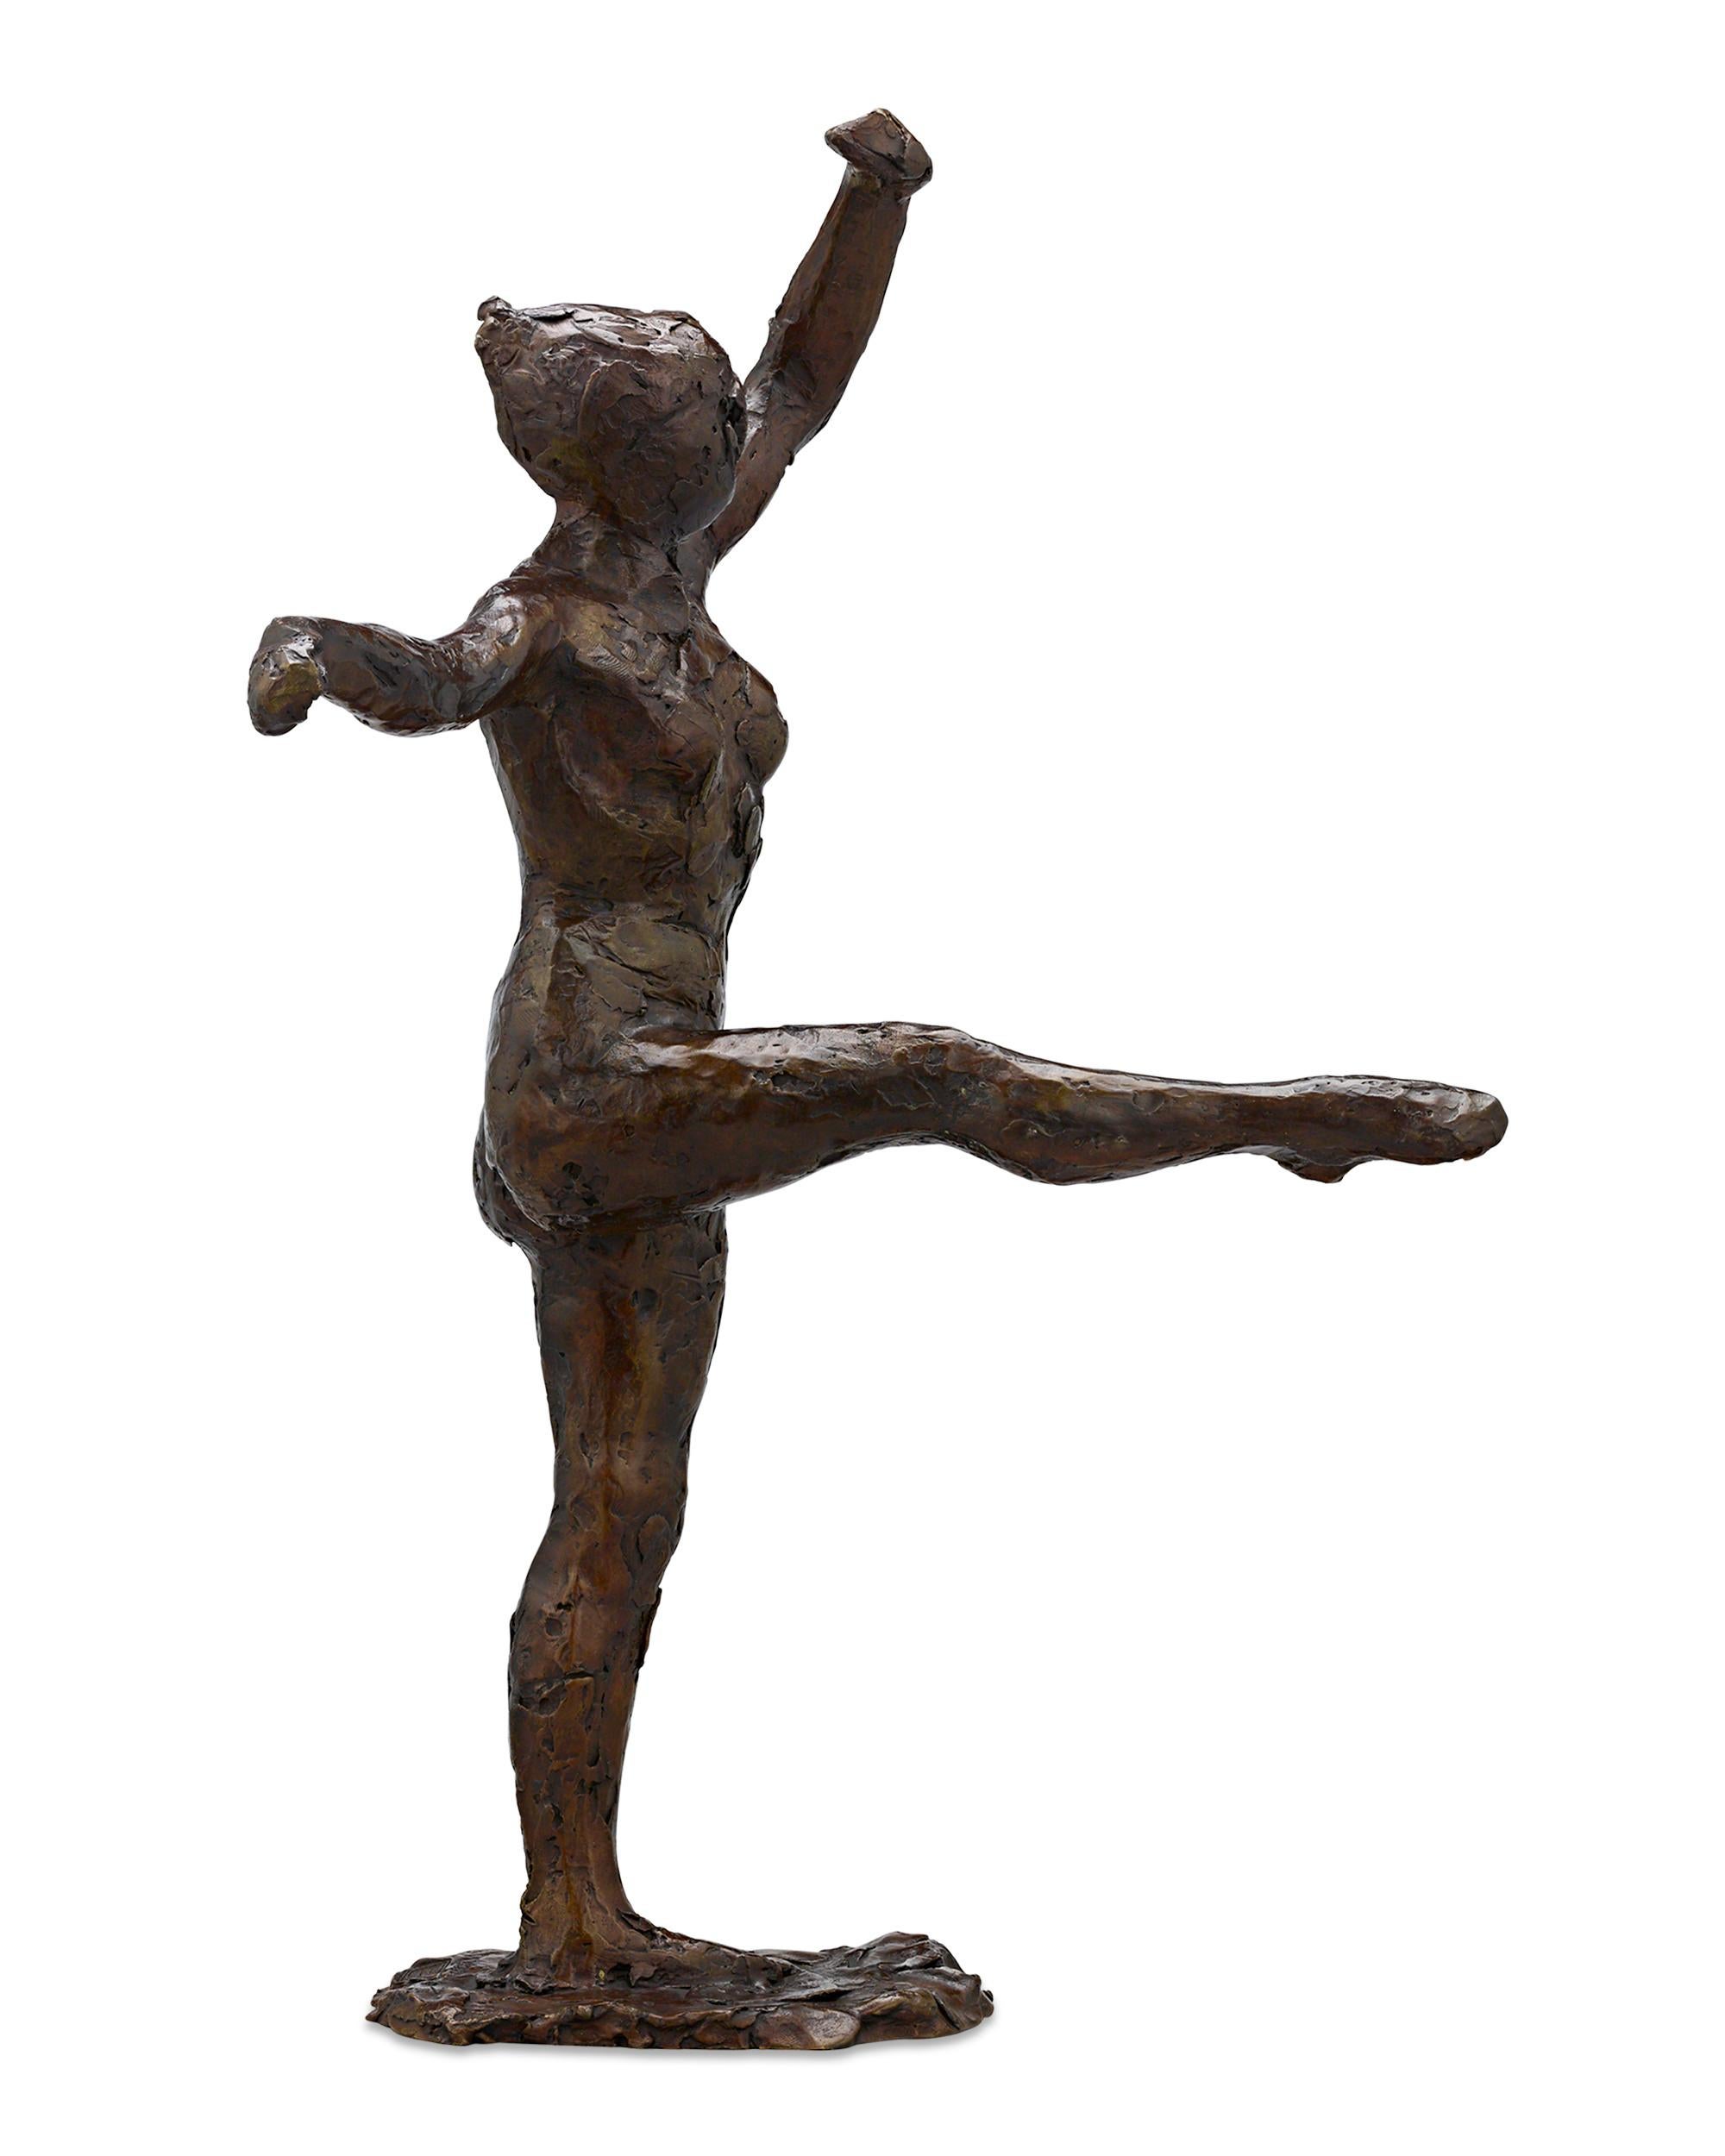 Fourth Position Front, on the Left Leg - Sculpture by Edgar Degas